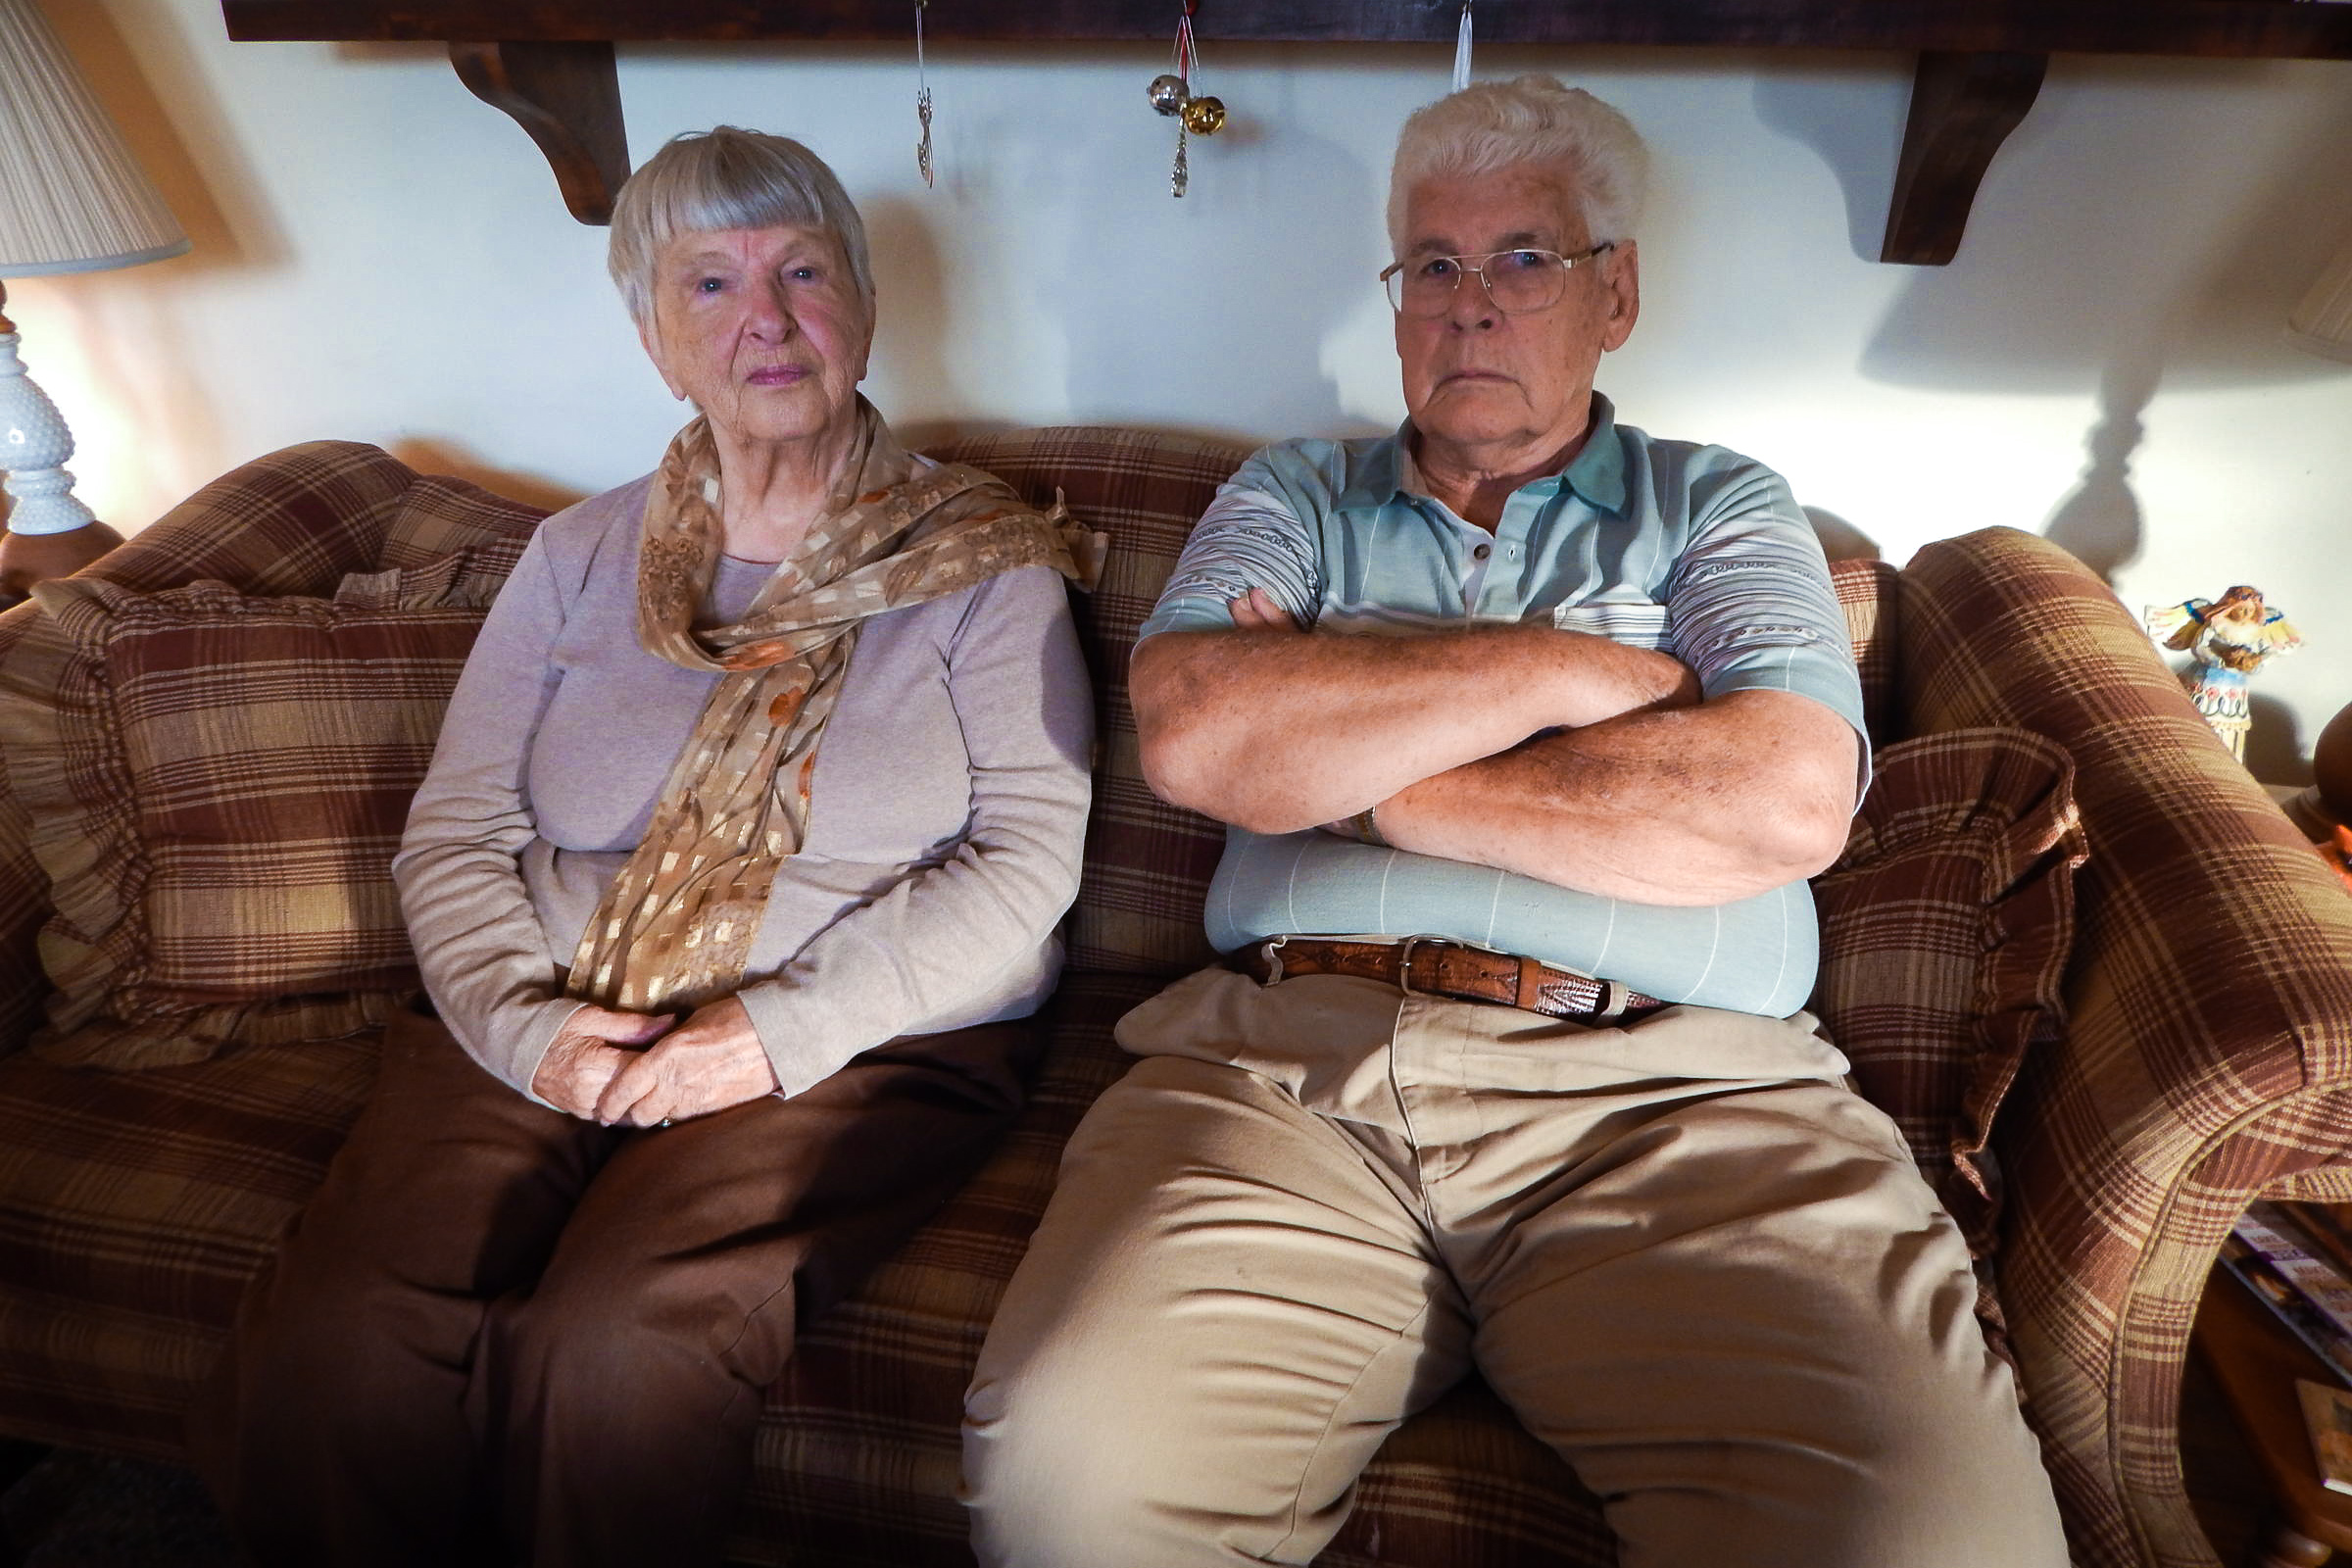 Norm and Betty Jo Anderson have lived in Piketon, Ohio since the mid-1950s, when Norm started working at the Portsmouth Gaseous Diffusion Plant. Photo: Lewis Wallace / WYSO